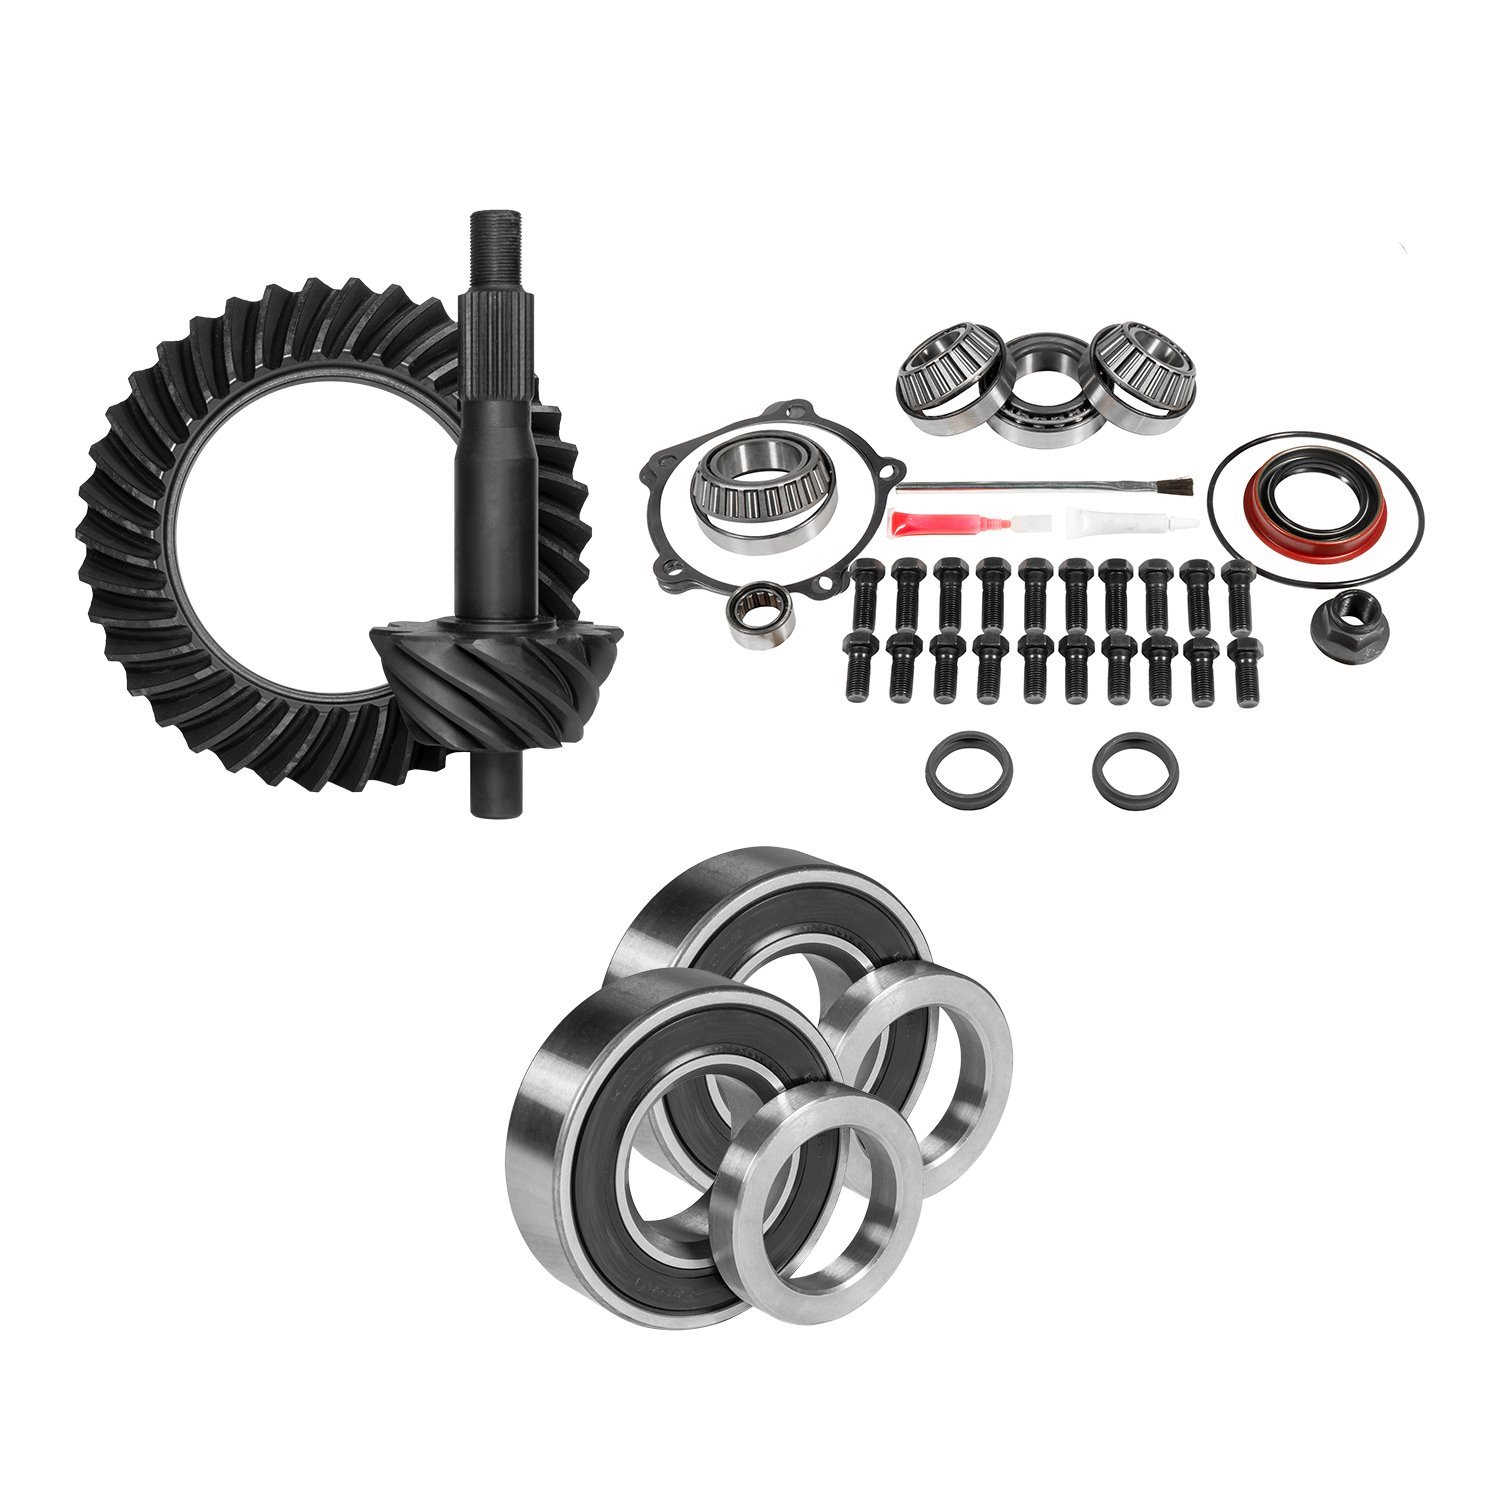 Muscle Car Re-Gear Kit For Ford 8 in. Differential, 25 Spline, 4.11 Ratio